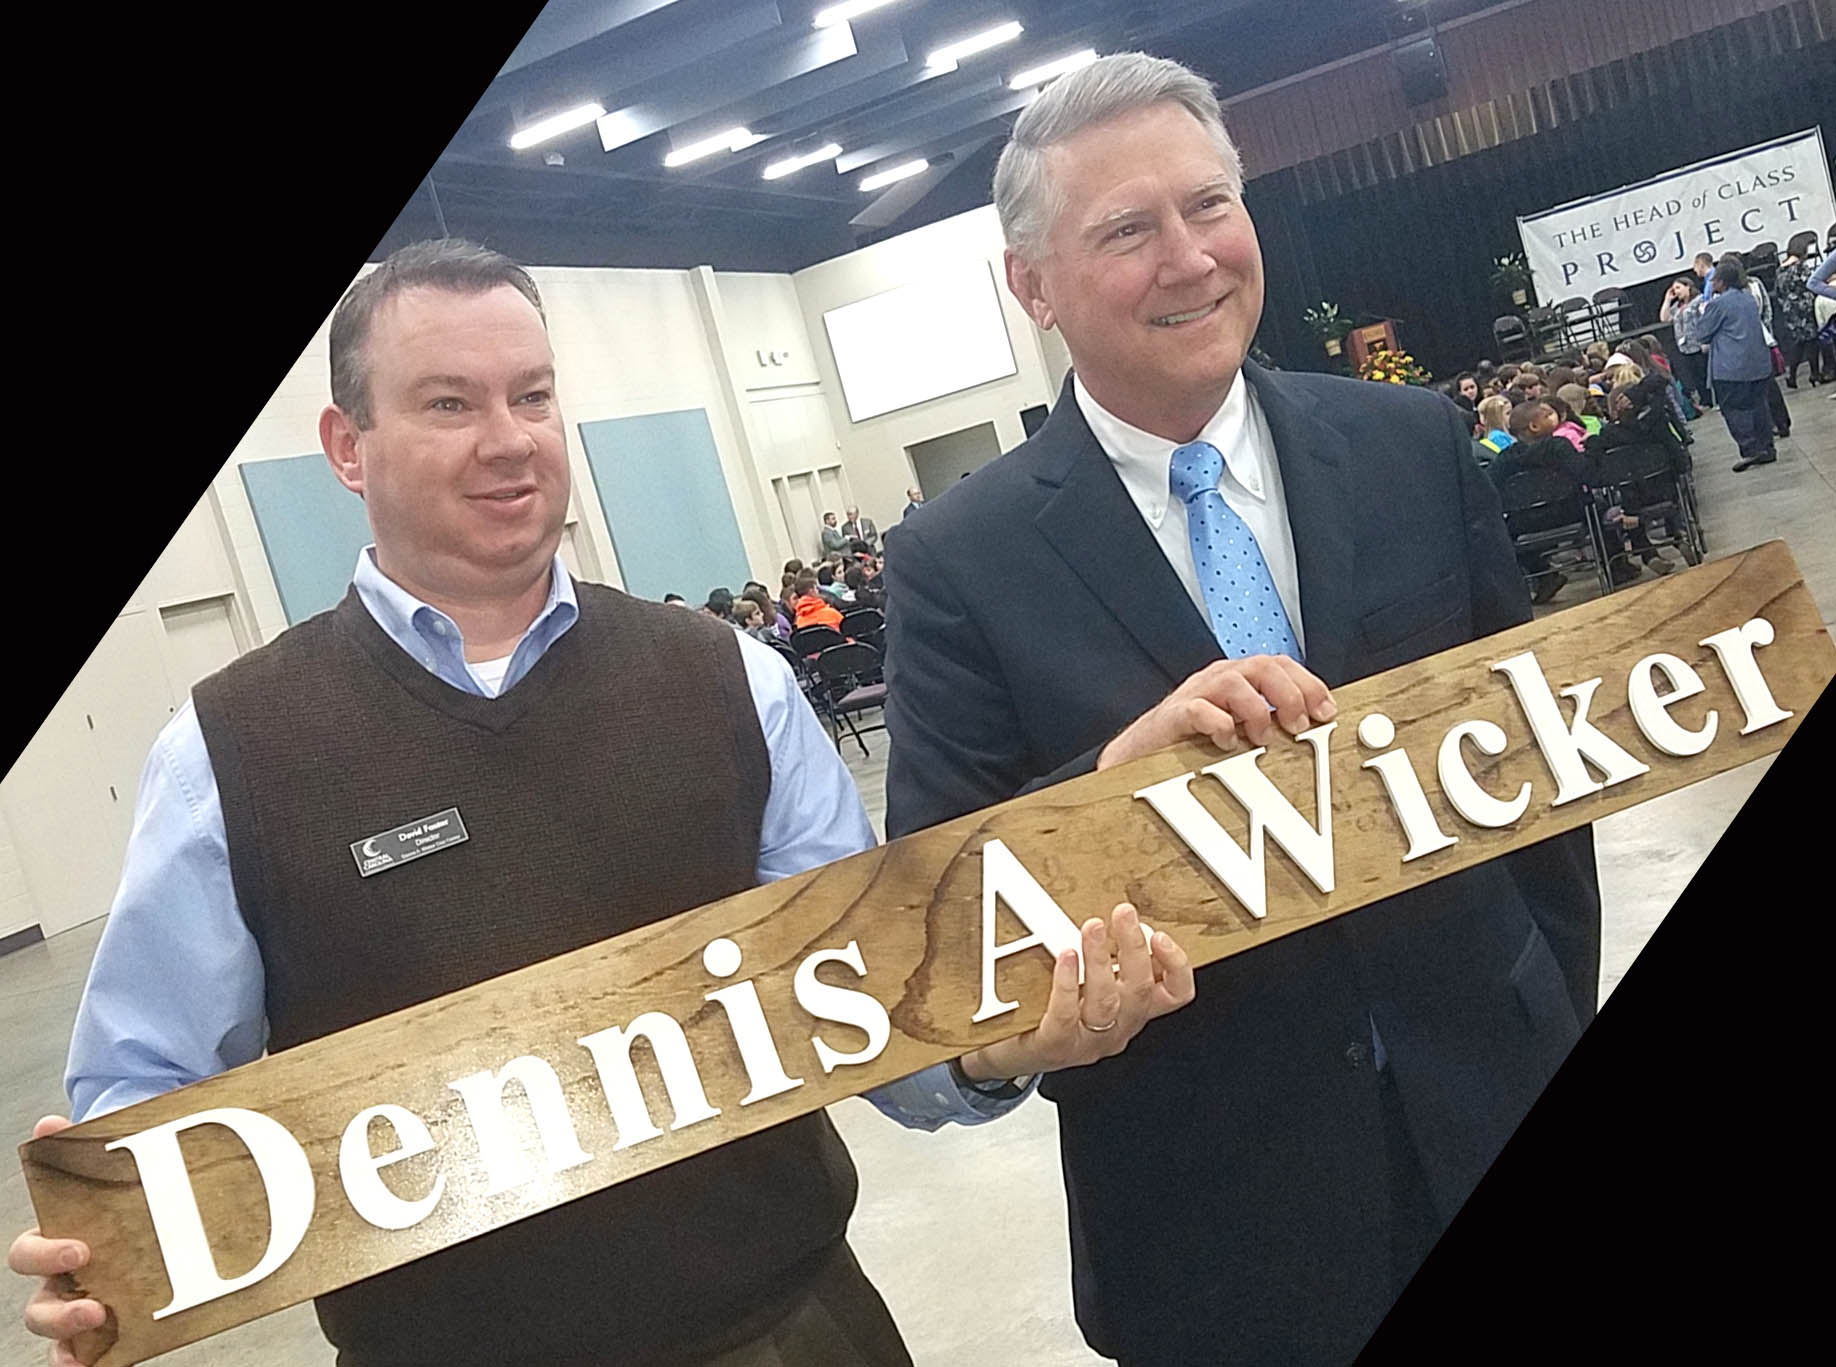 Original sign letters presented to Dennis A. Wicker